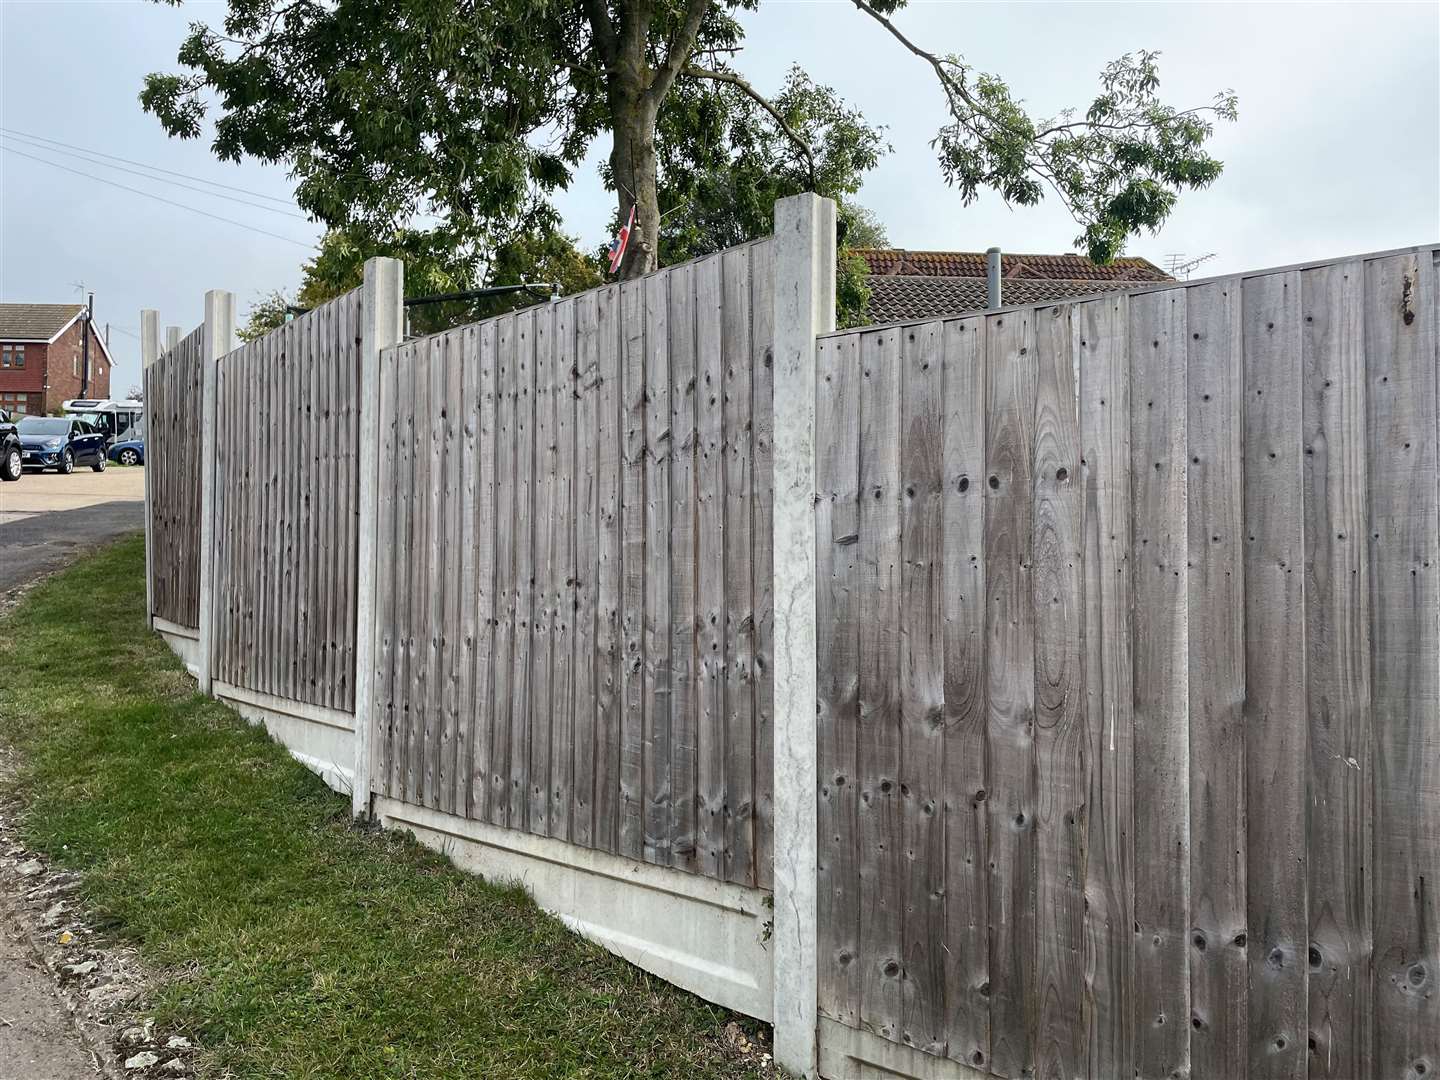 The fence surrounds the property but leaves a metre gap between it and street